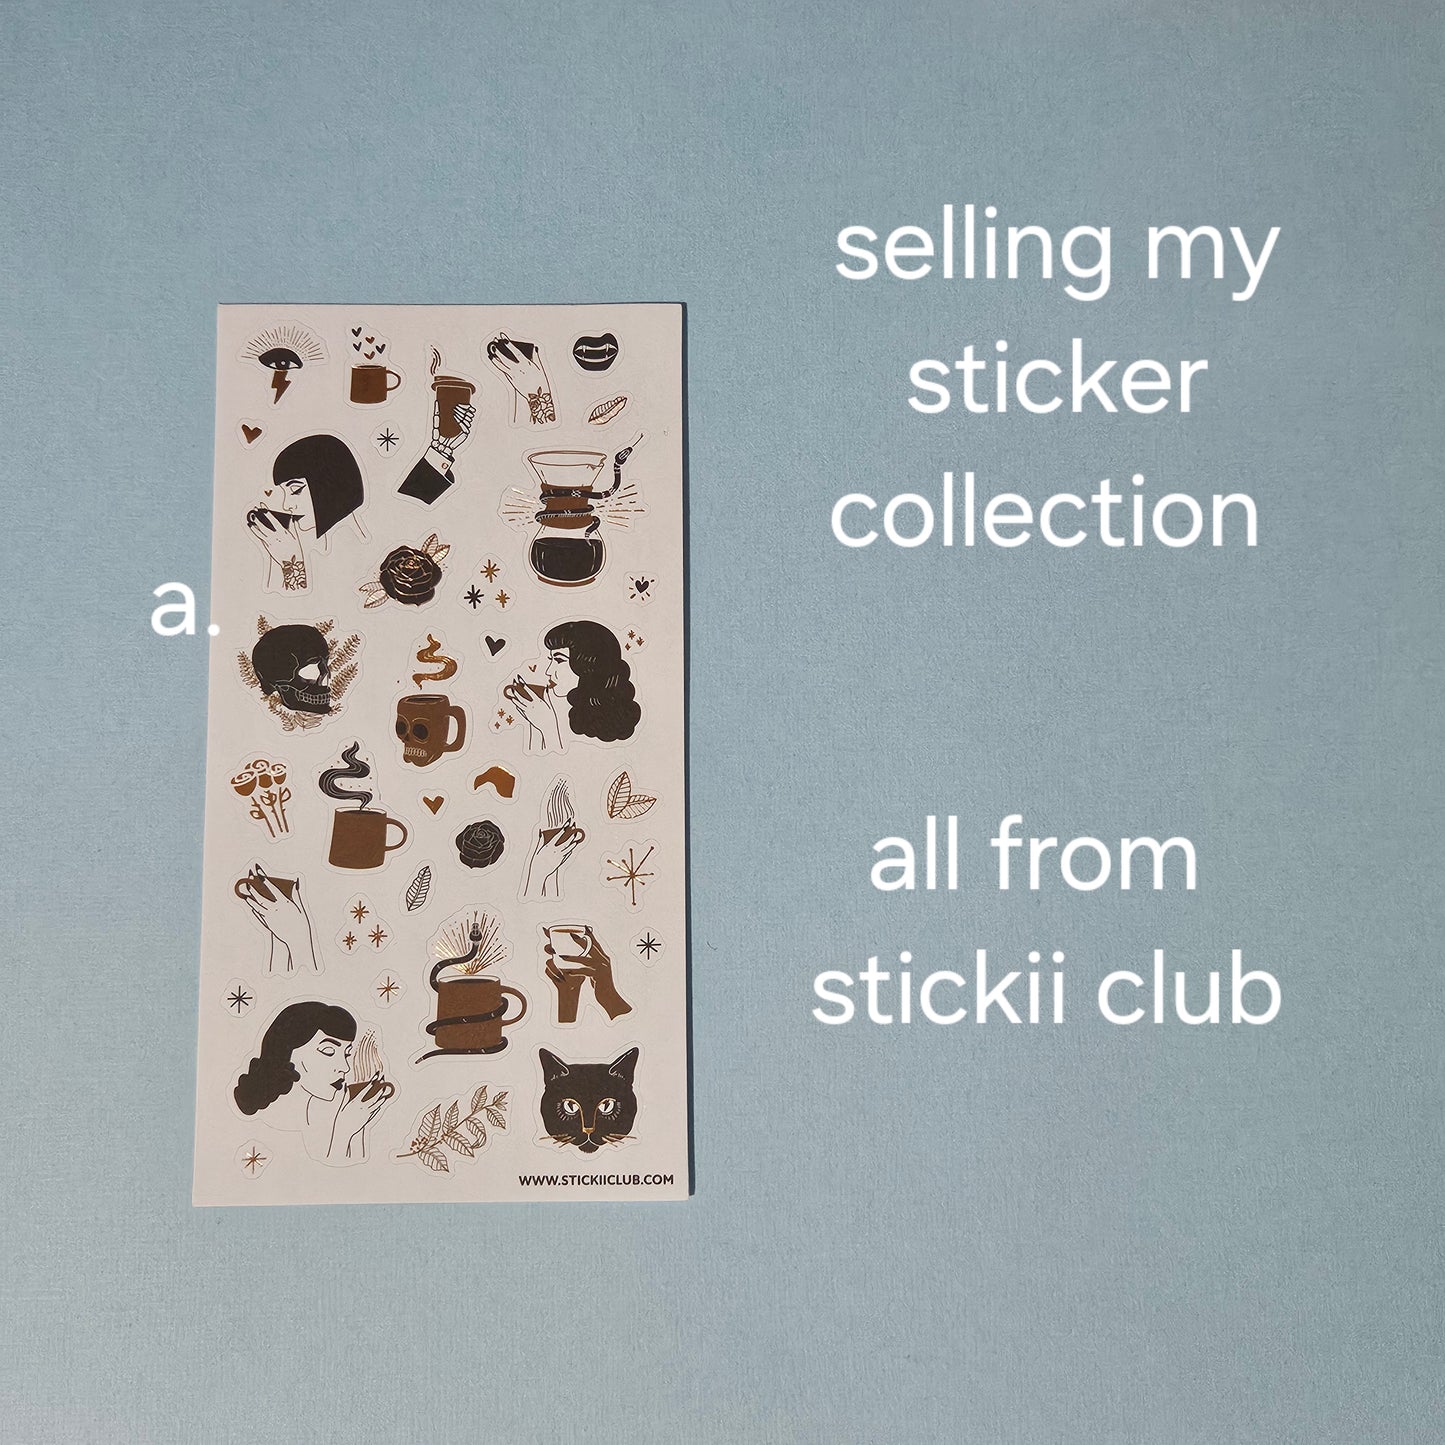 Selling my sticker collection